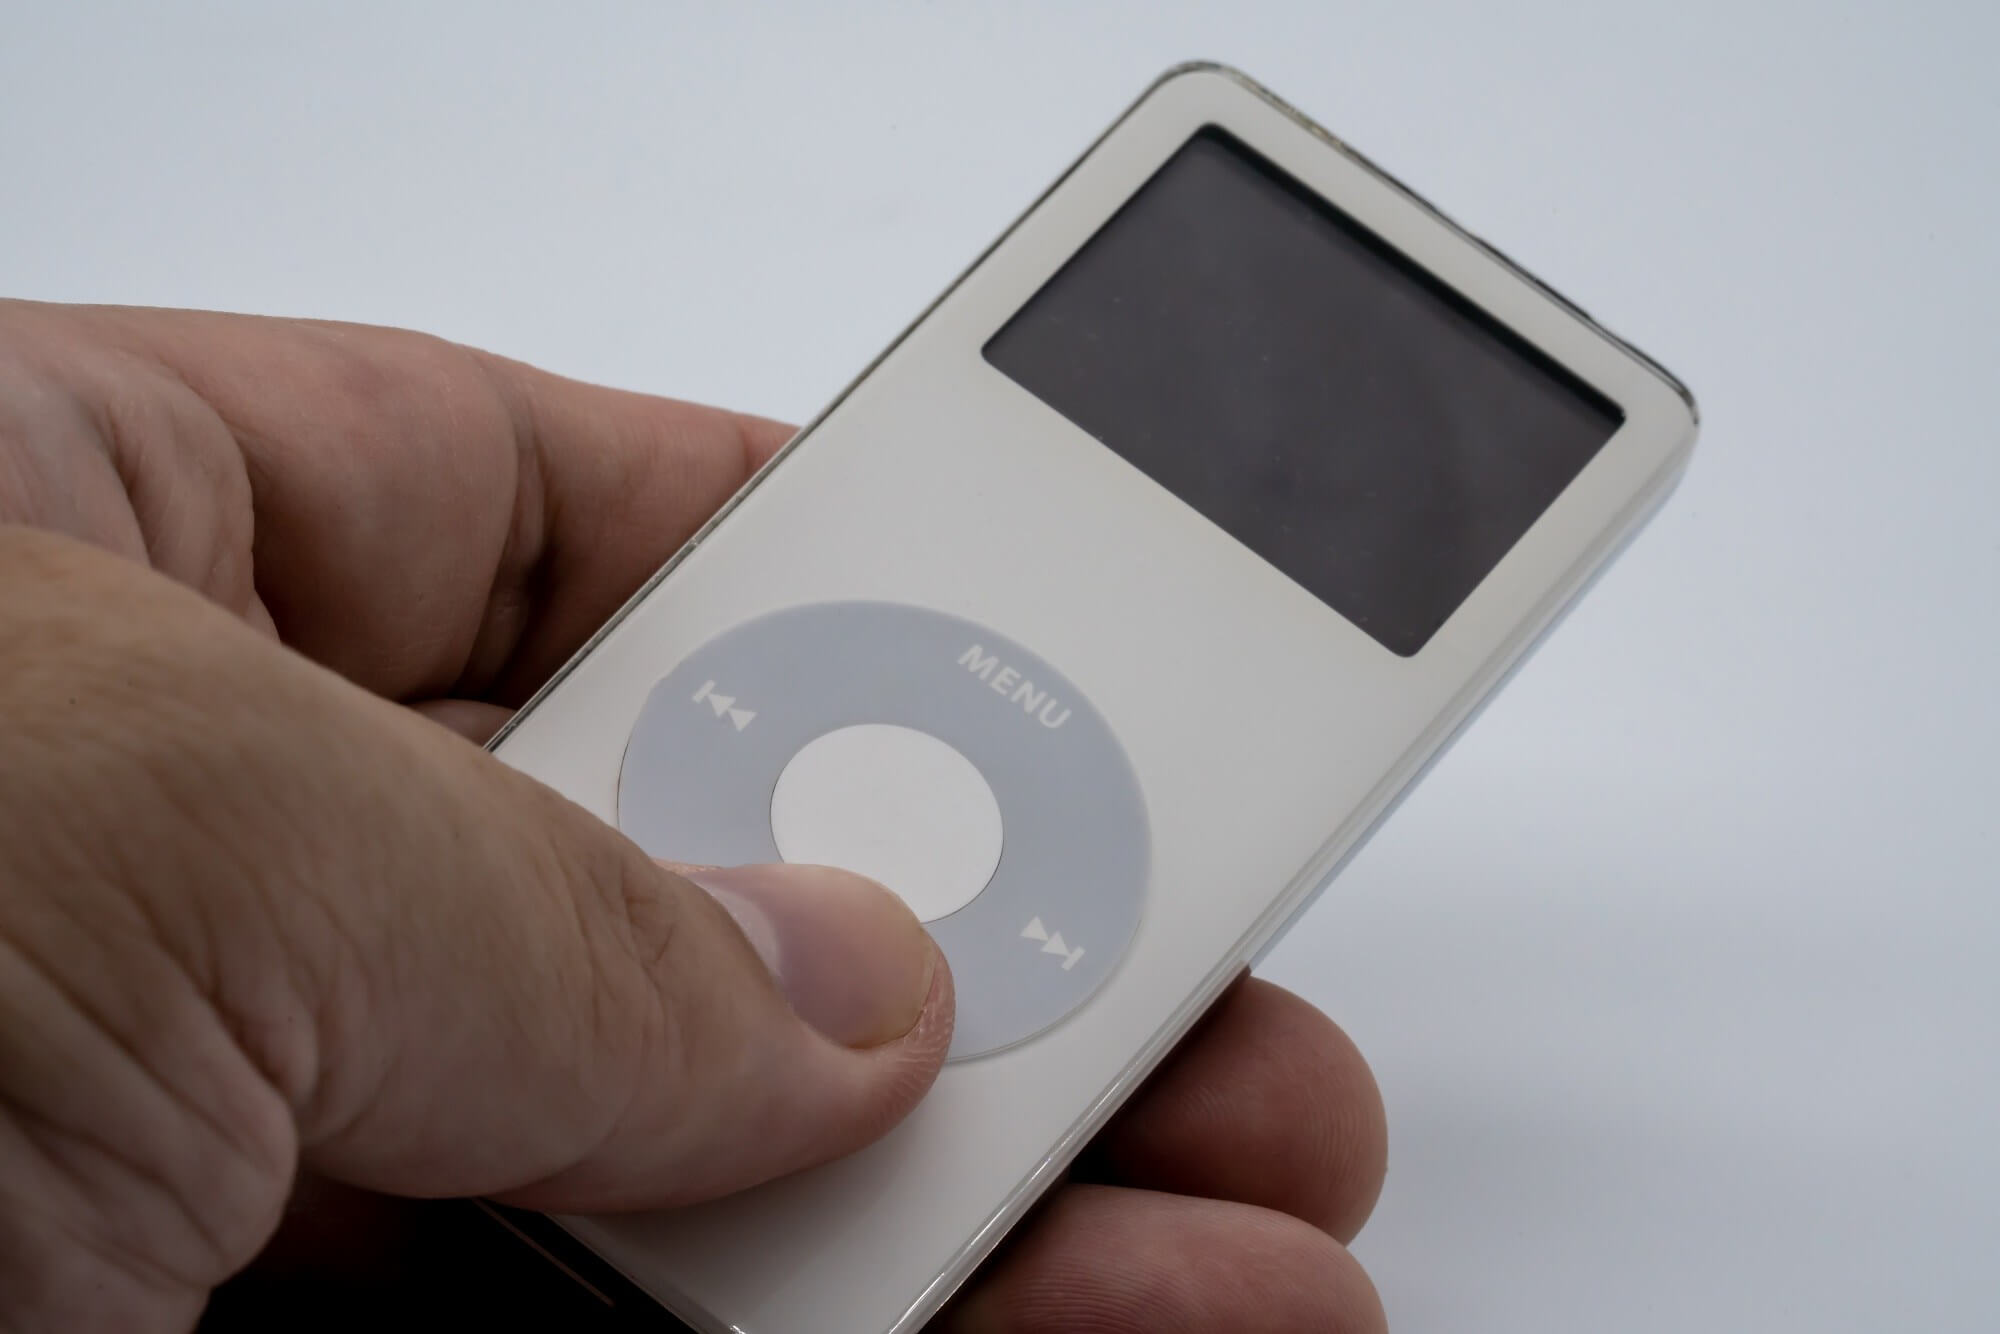 Apple made a top secret iPod for the US government fifteen years ago